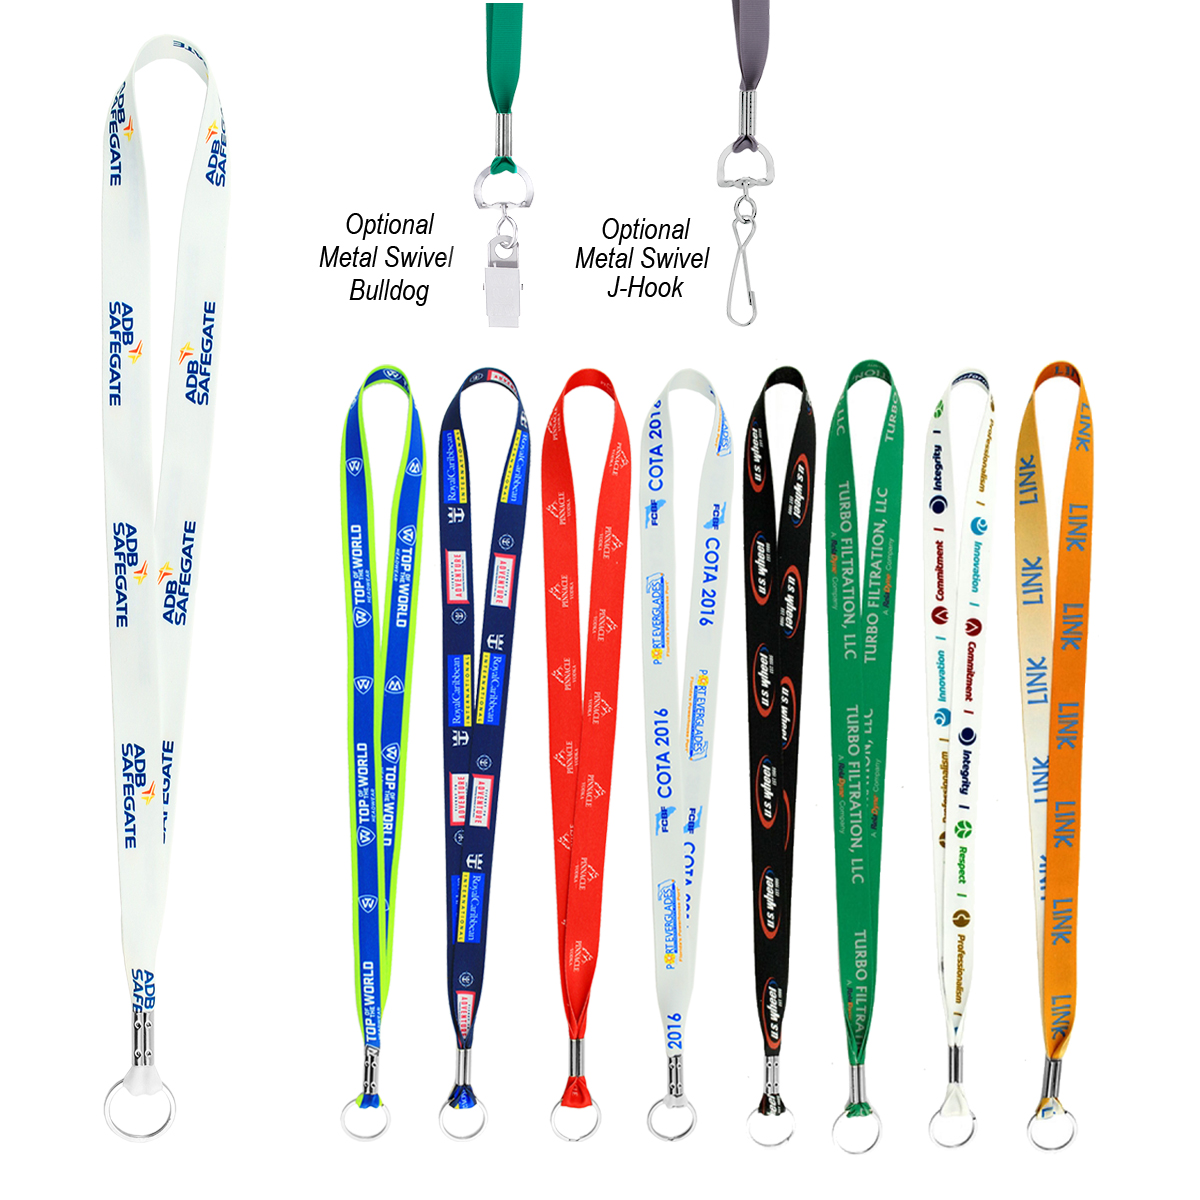 Branded & Promotional 20mm Dye Sublimation Lanyard - Action Promote